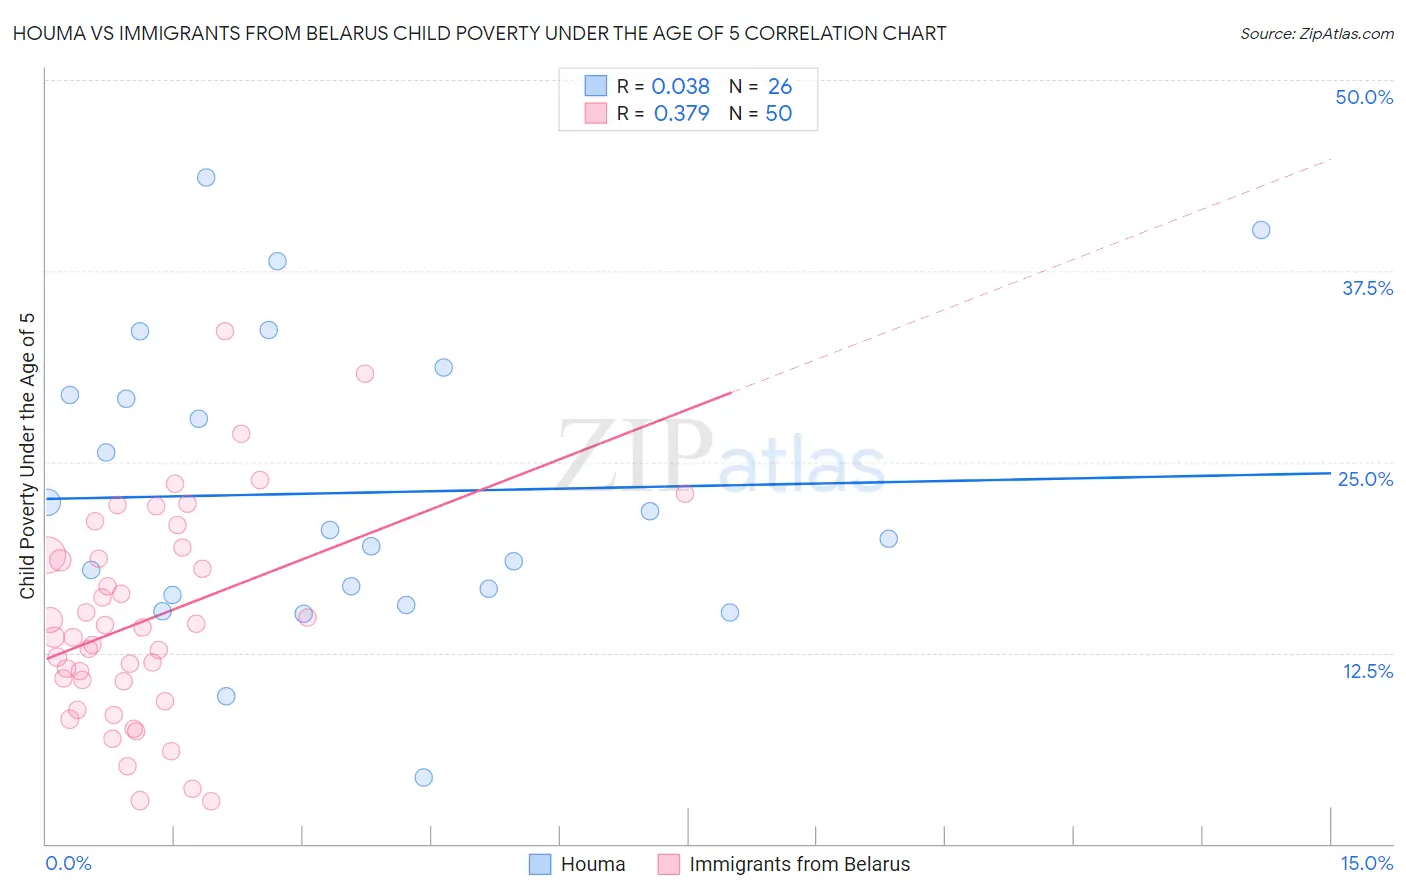 Houma vs Immigrants from Belarus Child Poverty Under the Age of 5